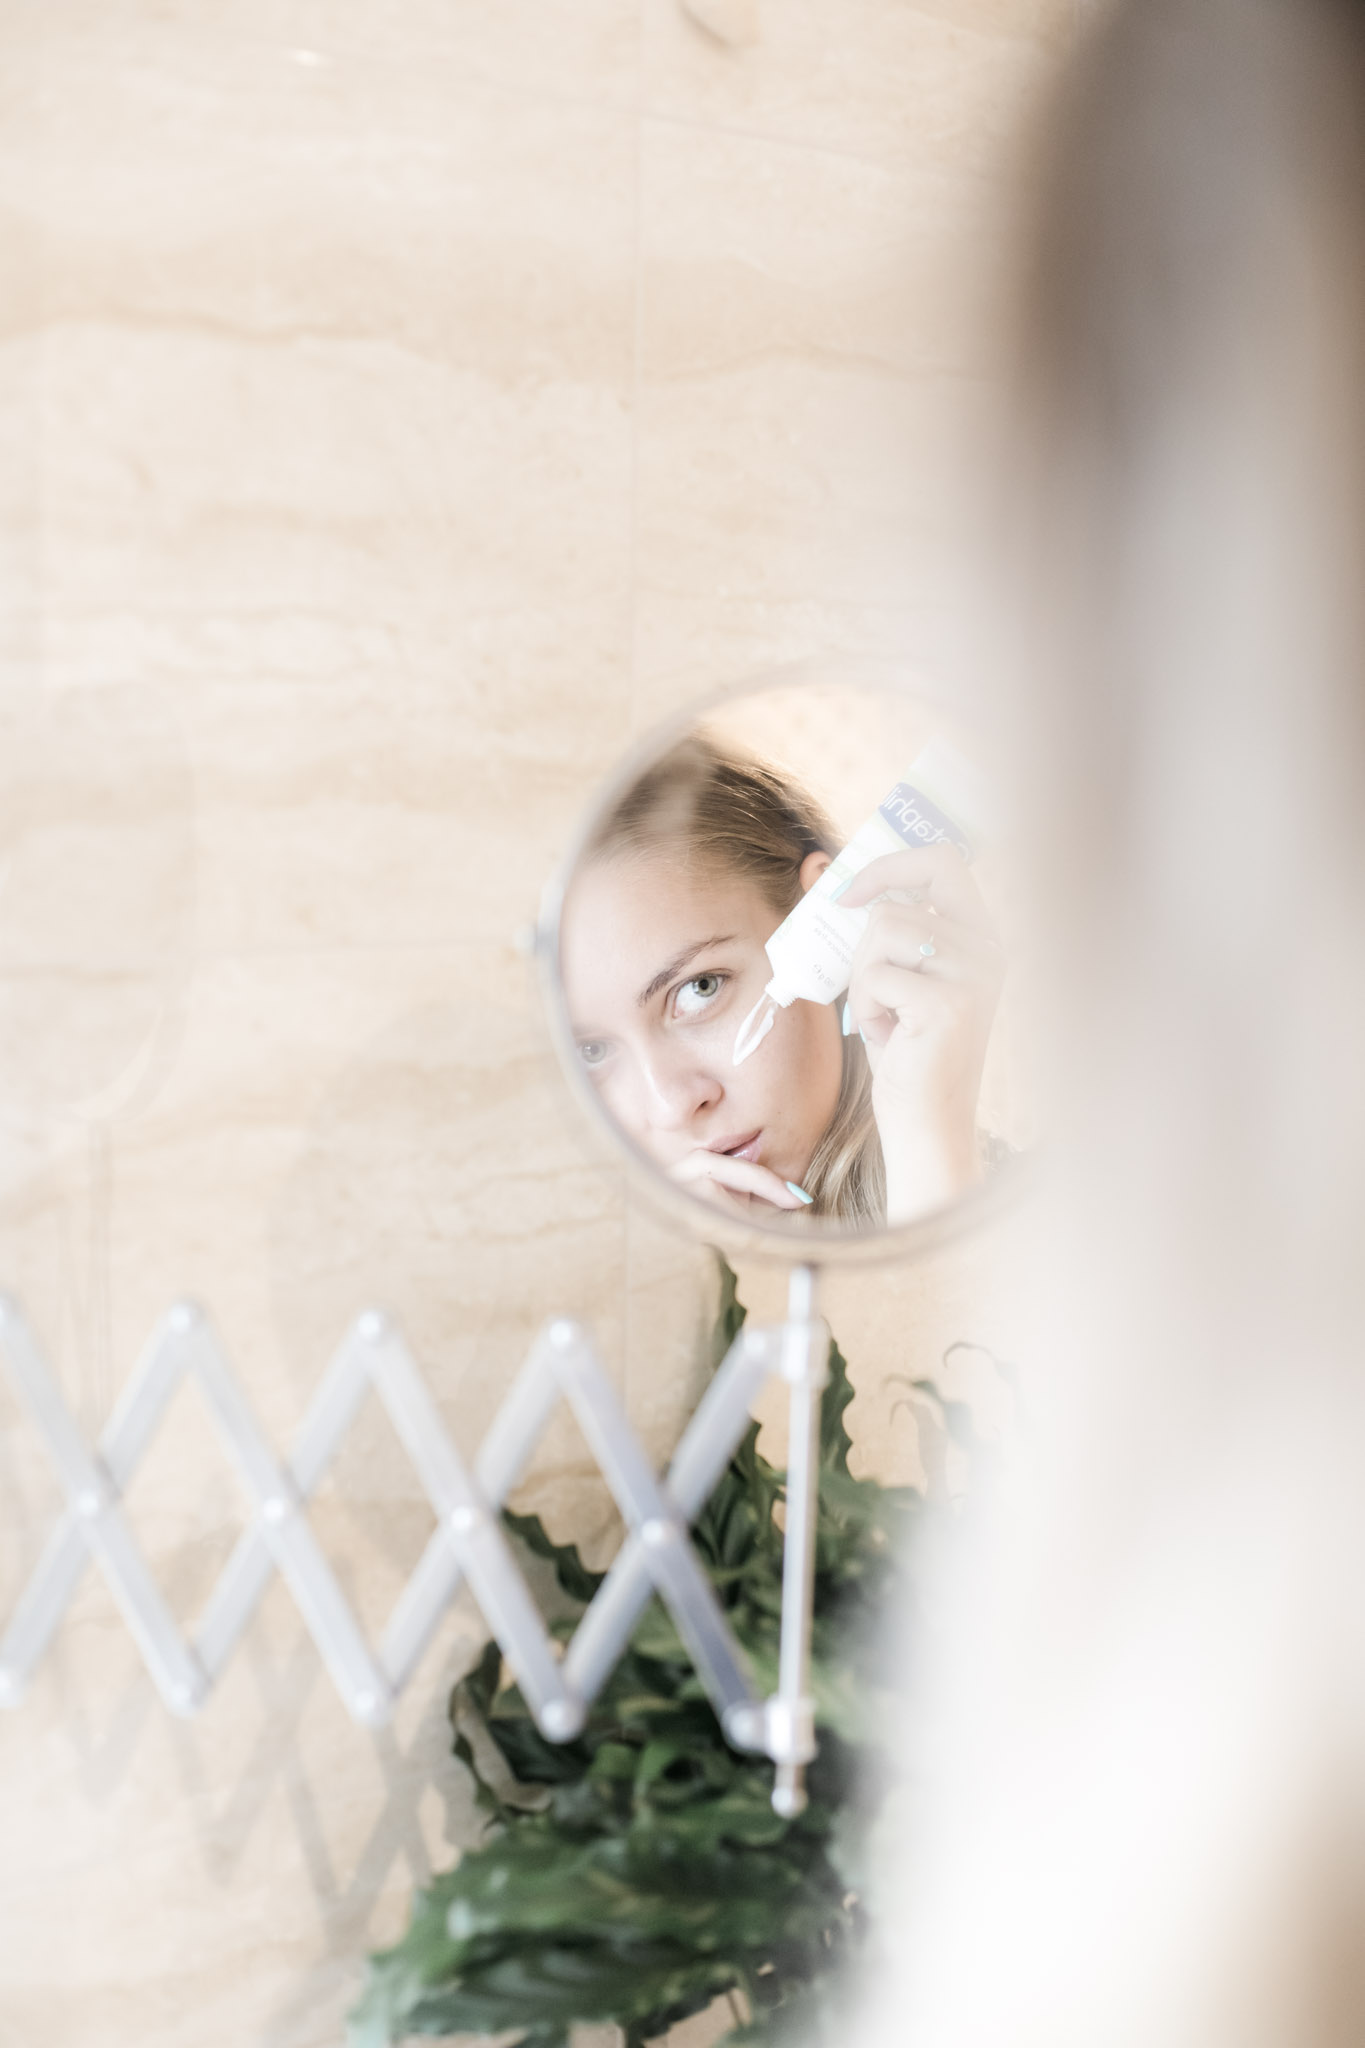 A close up of a woman applying skin care product on face and looking in the mirror. This article covers what you need to know about protecting the health of your skin.